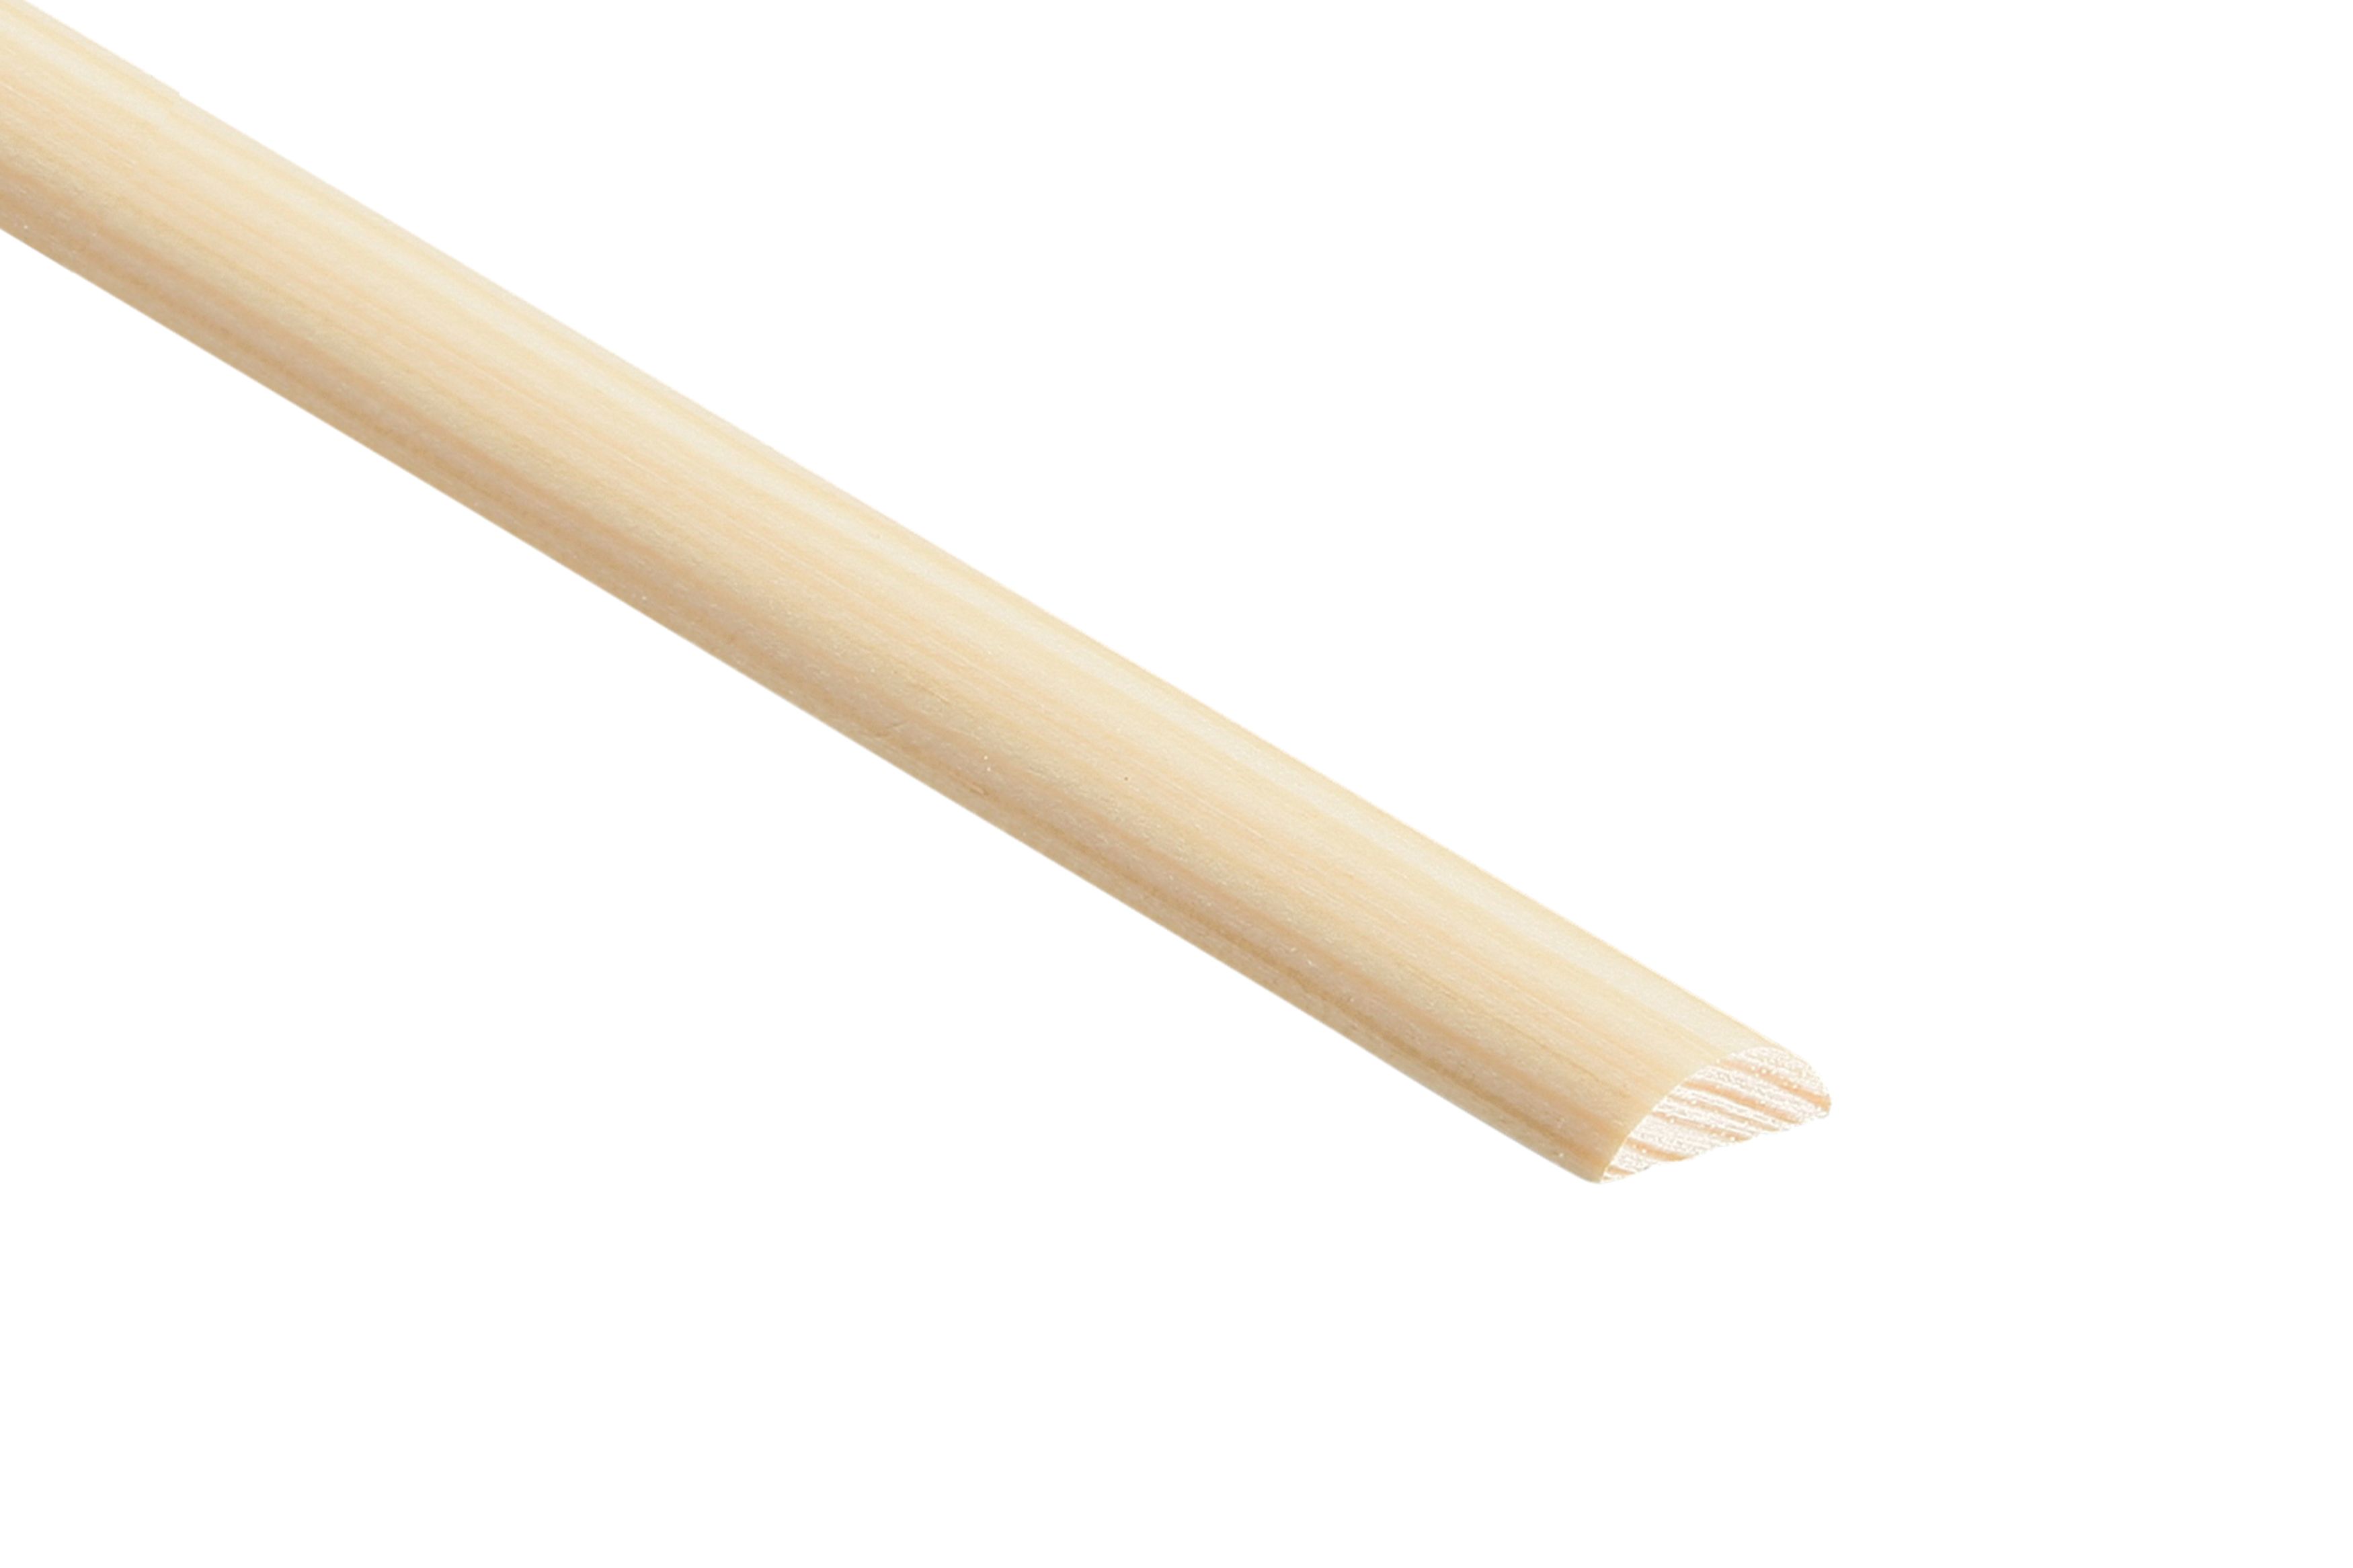 Image of Wickes Pine Half Round Moulding - 16 x 4 x 2400mm